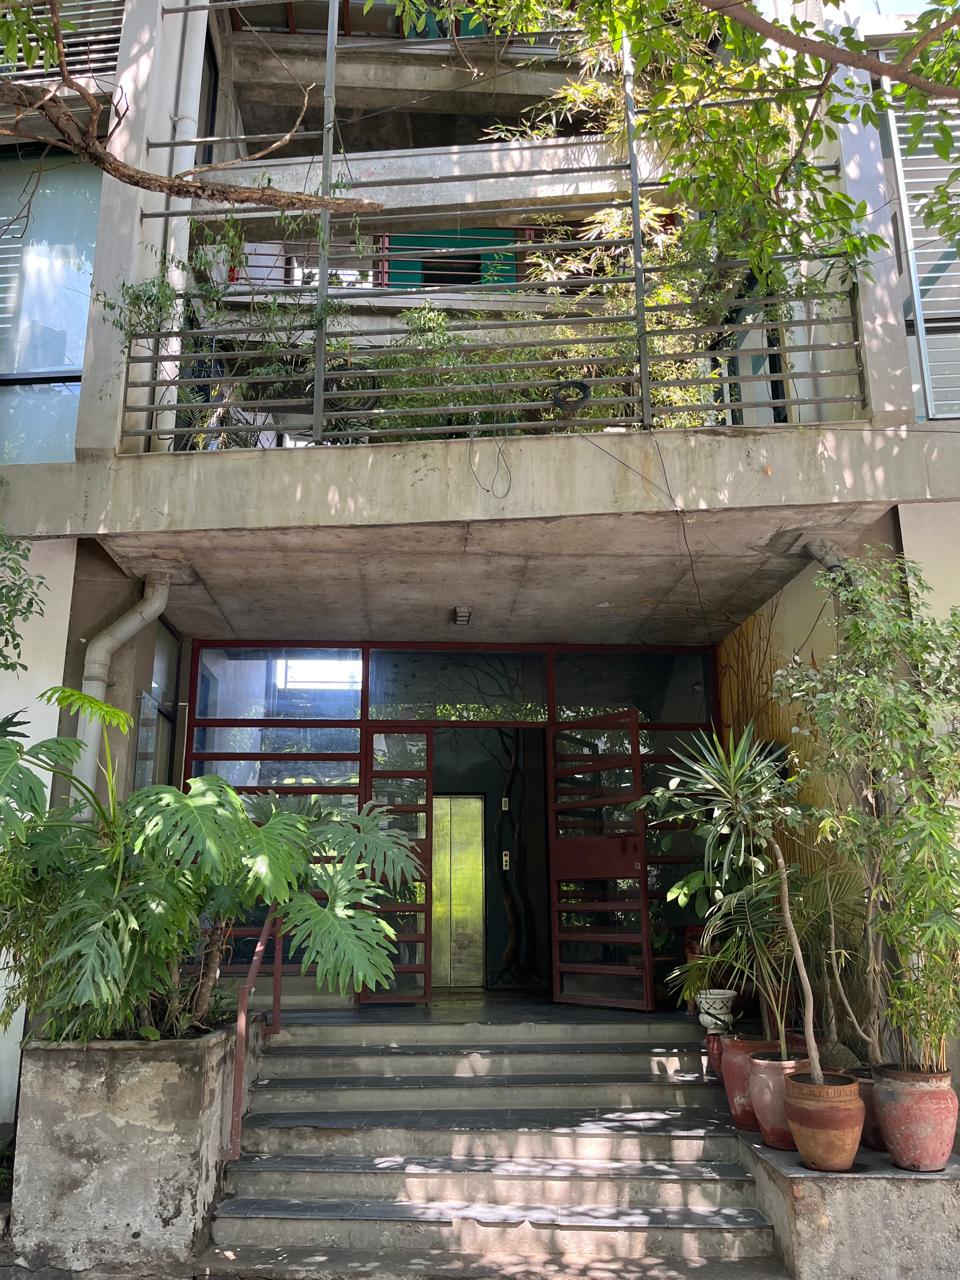 Sura: A commercial building in Darbarmarg Kathmandu the lop floor has two apartments with roof garden.